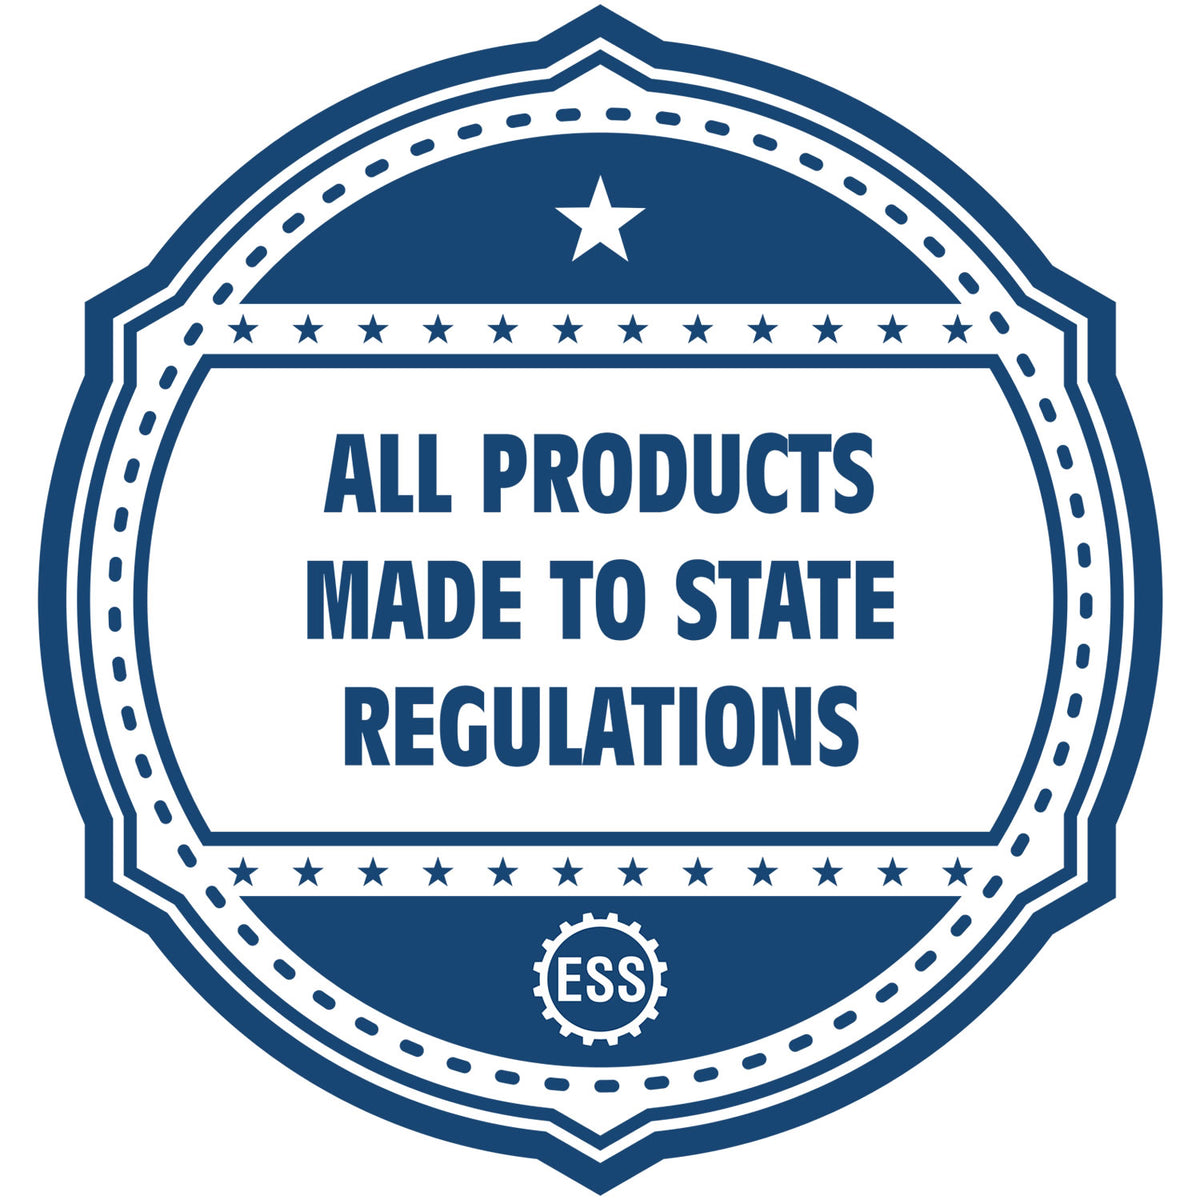 An icon or badge element for the Wooden Handle Louisiana State Seal Notary Public Stamp showing that this product is made in compliance with state regulations.